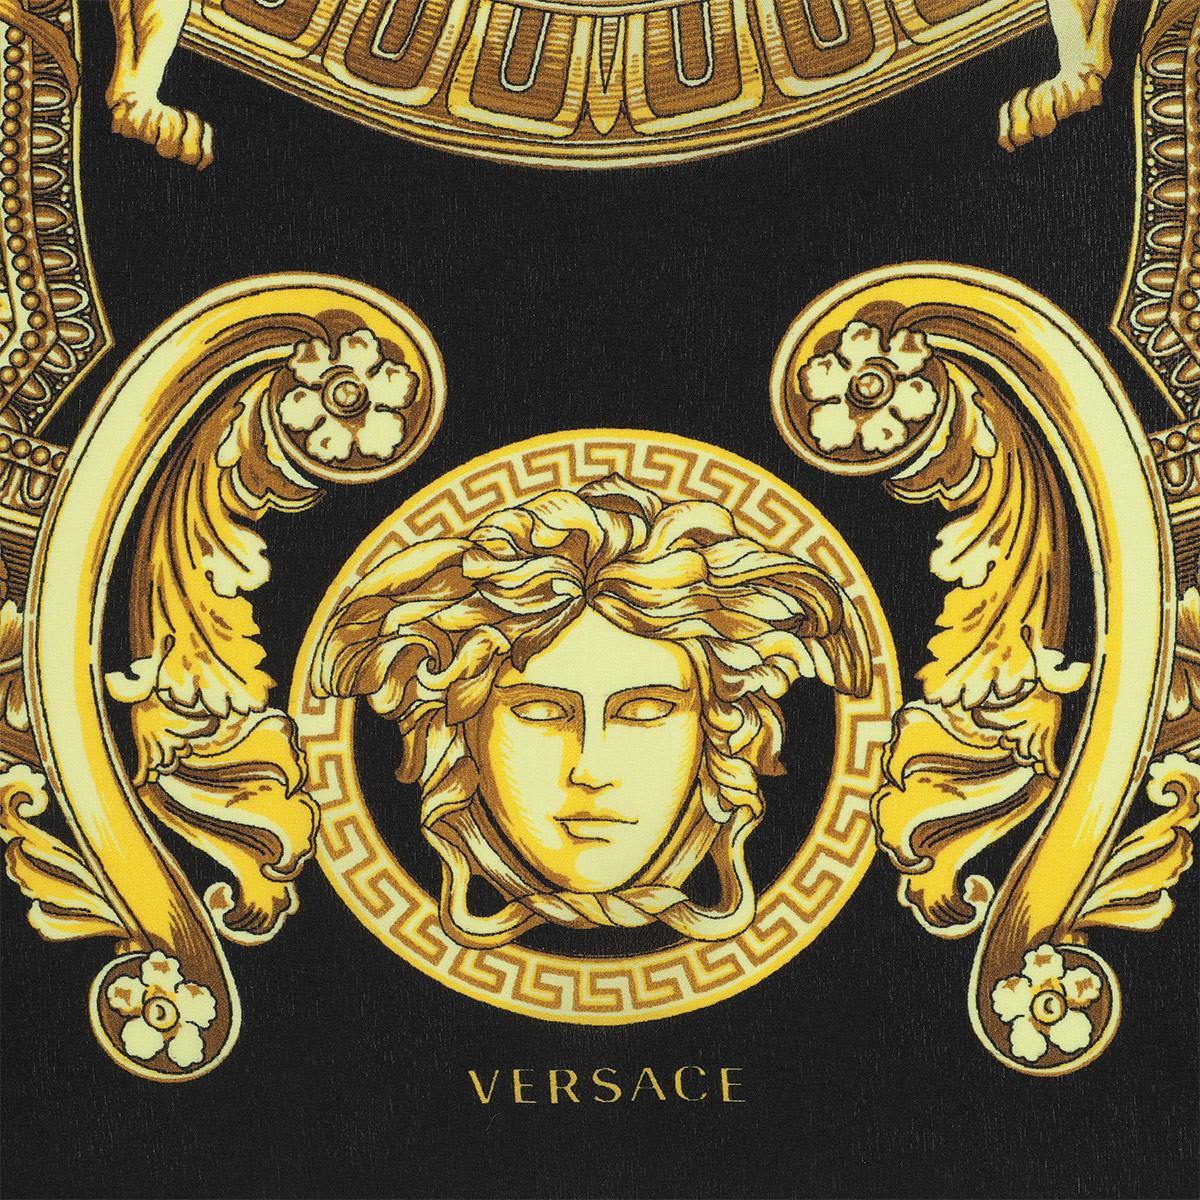 Black and Gold Versace Logo - Versace Stola Black Gold In Black